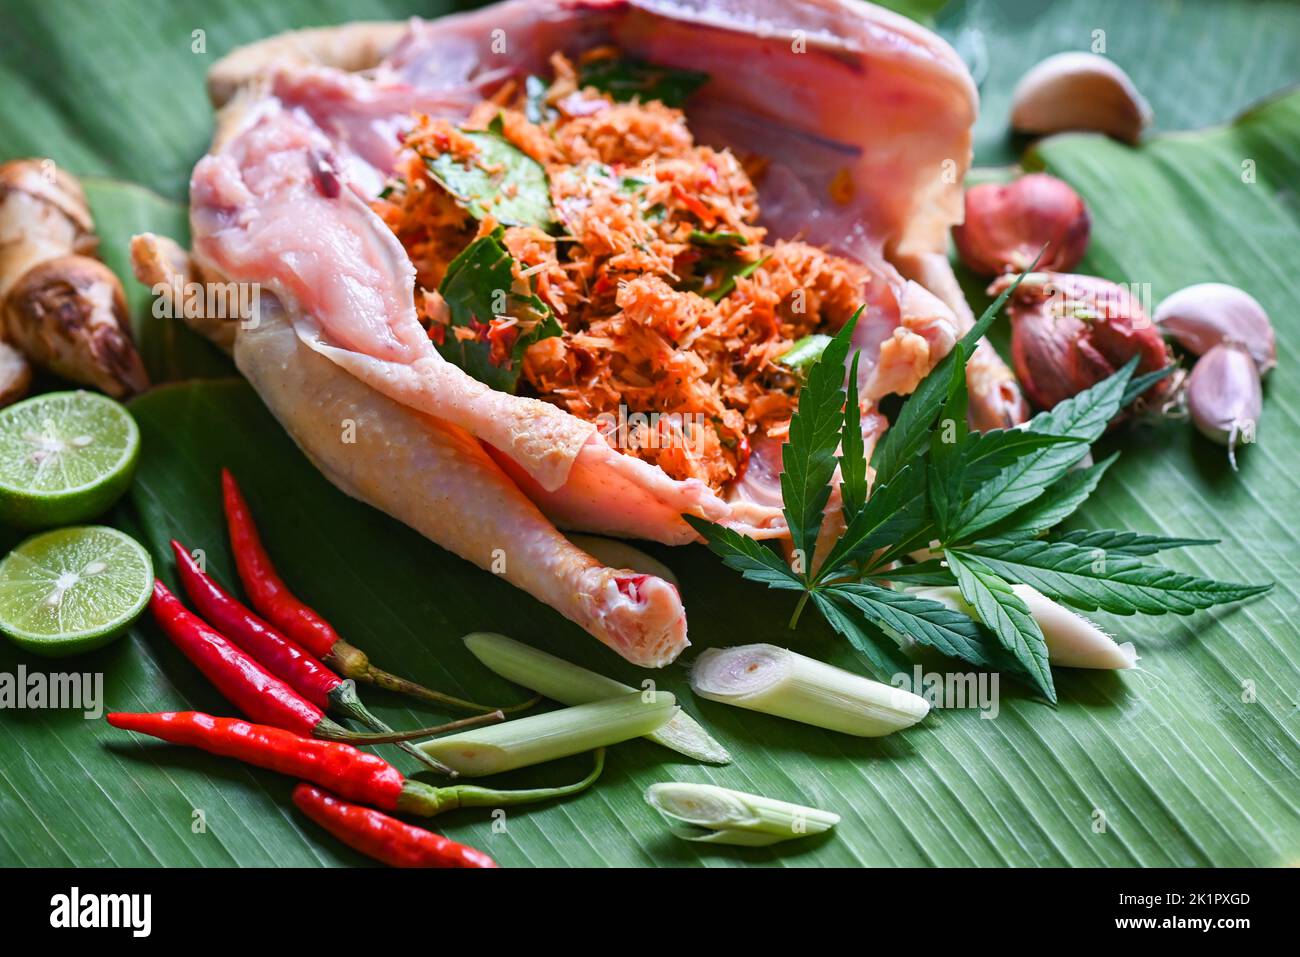 Cannabis food for cooking with fresh chicken cannabis leaf marijuana vegetables herbs and spices ingredients on banana leaf background, raw chicken he Stock Photo